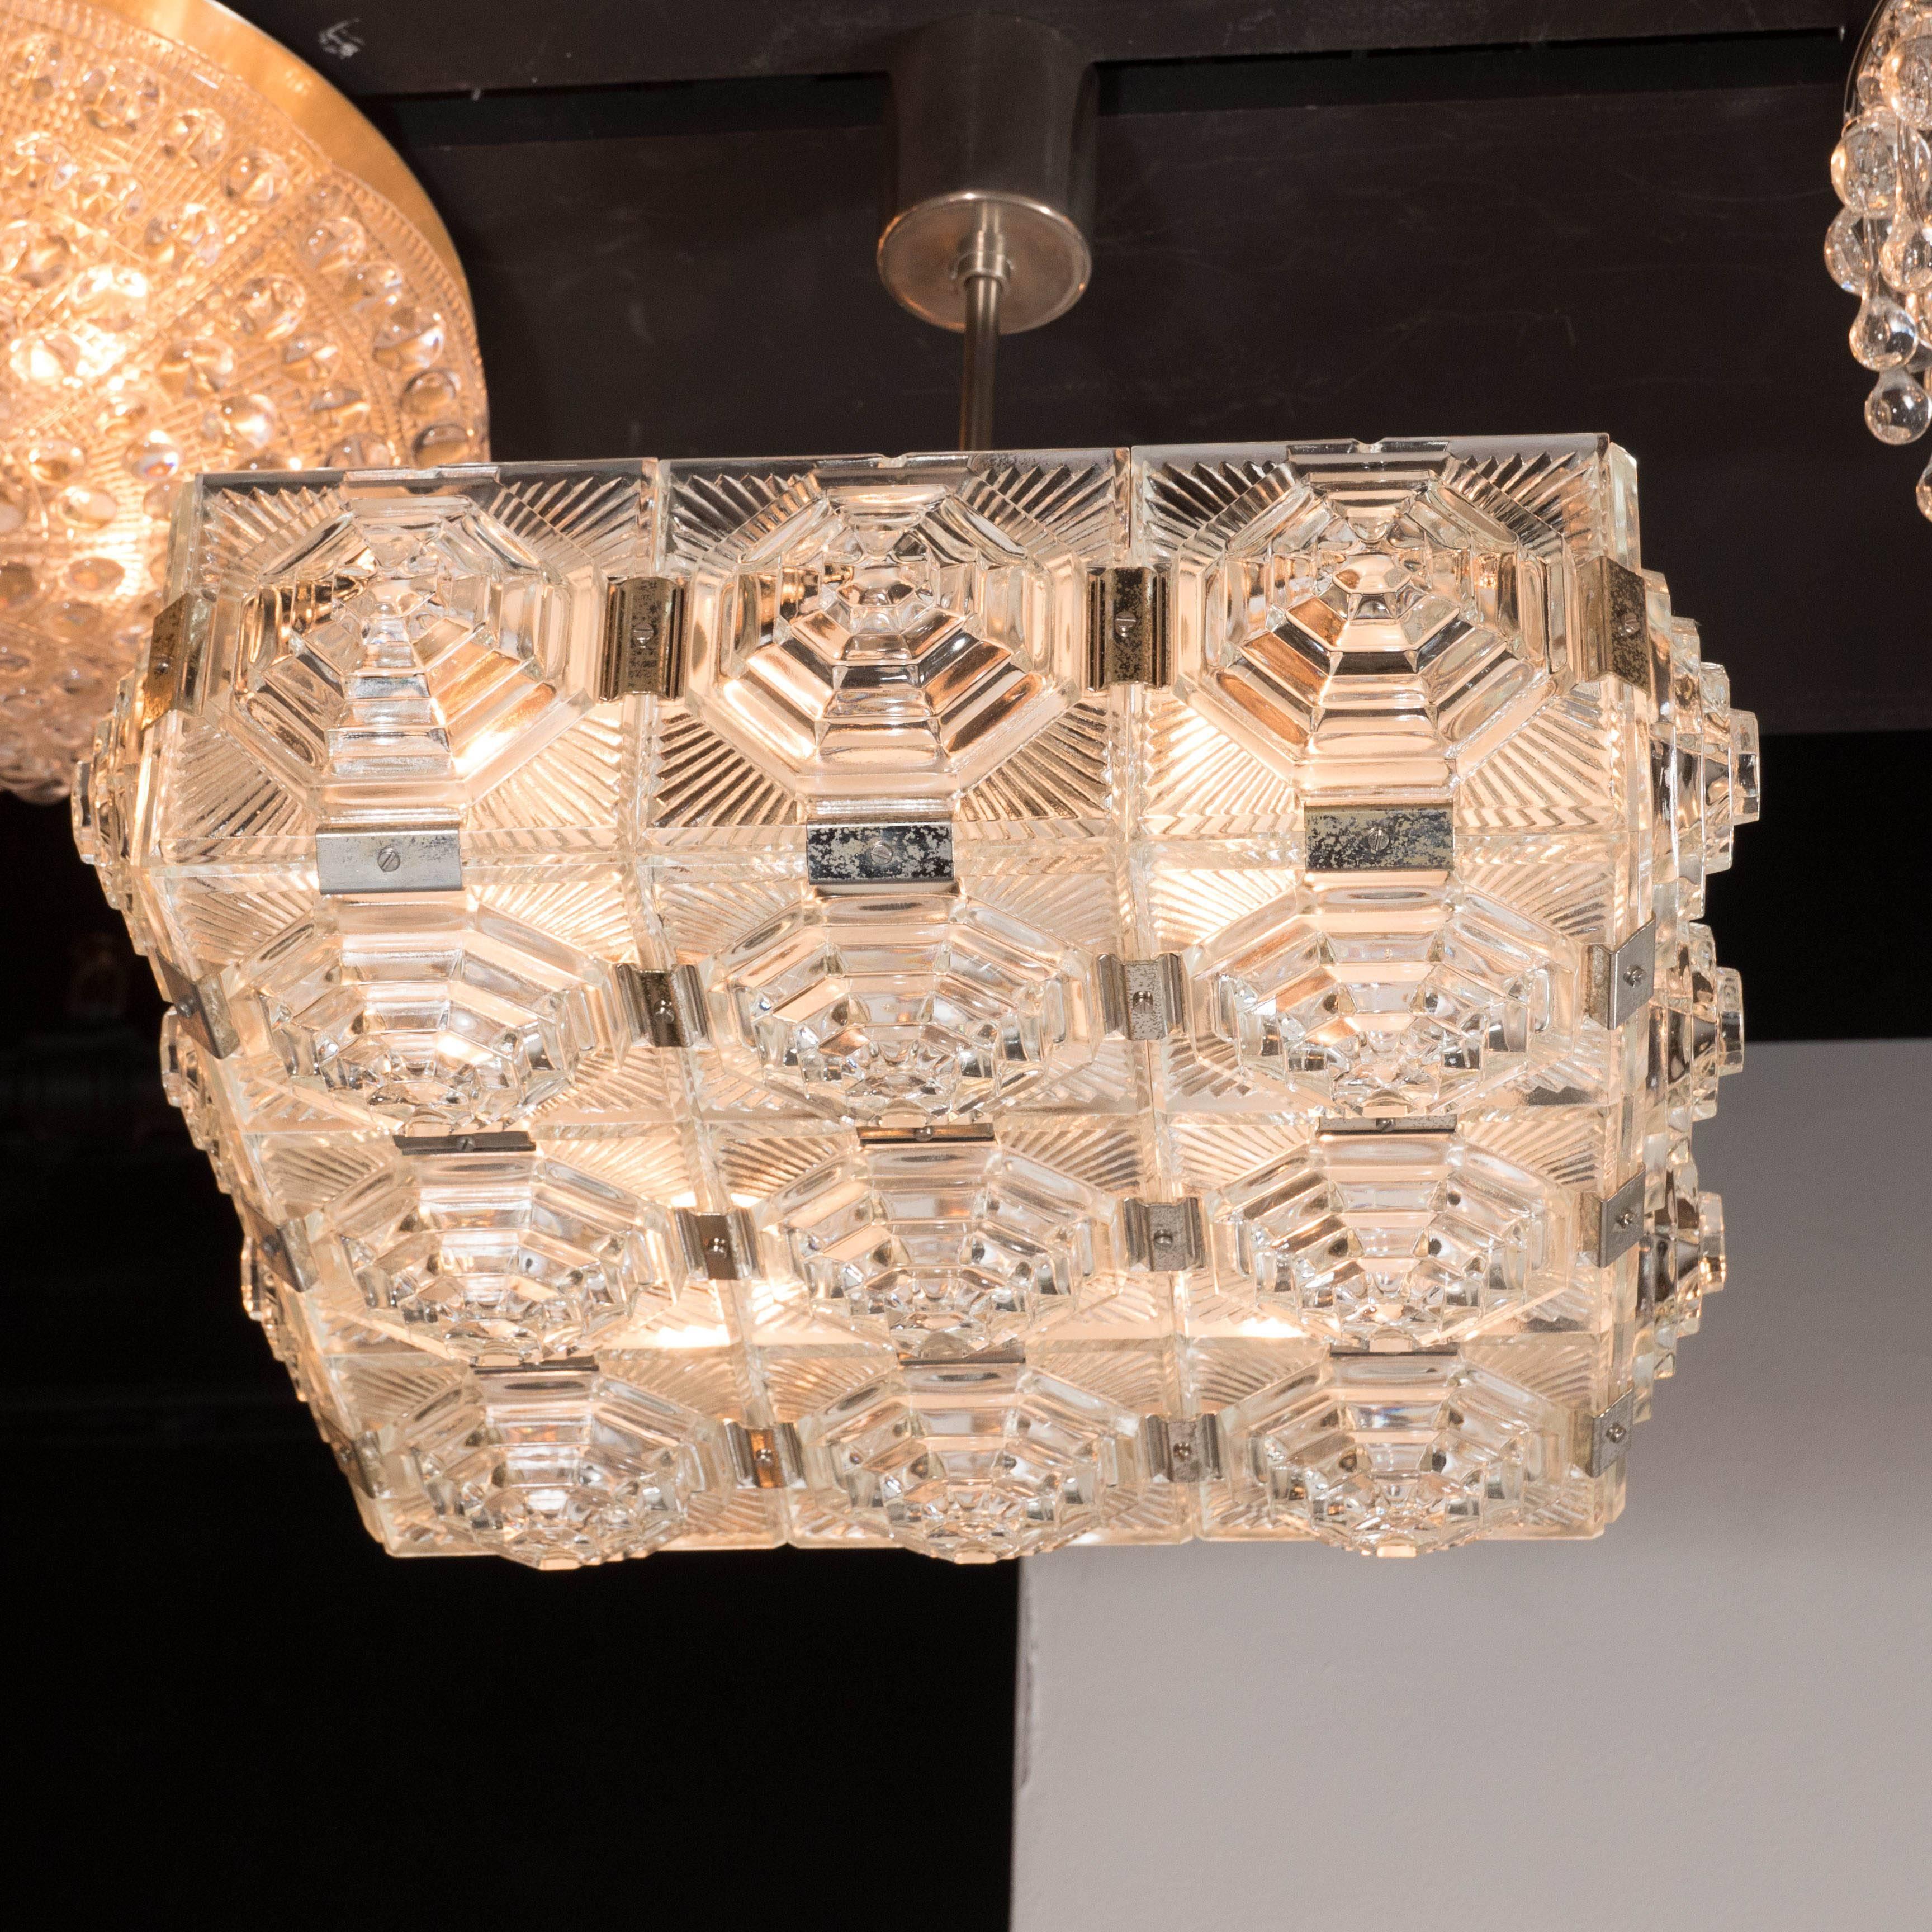 A Mid-Century Modernist semi-flush mounted chandelier in the style of Kinkeldey featuring a grid-like design of clear glass tiles with octagonal skyscraper style geometric patterns throughout. It is fitted with four candelabra bulbs (max 60 watts